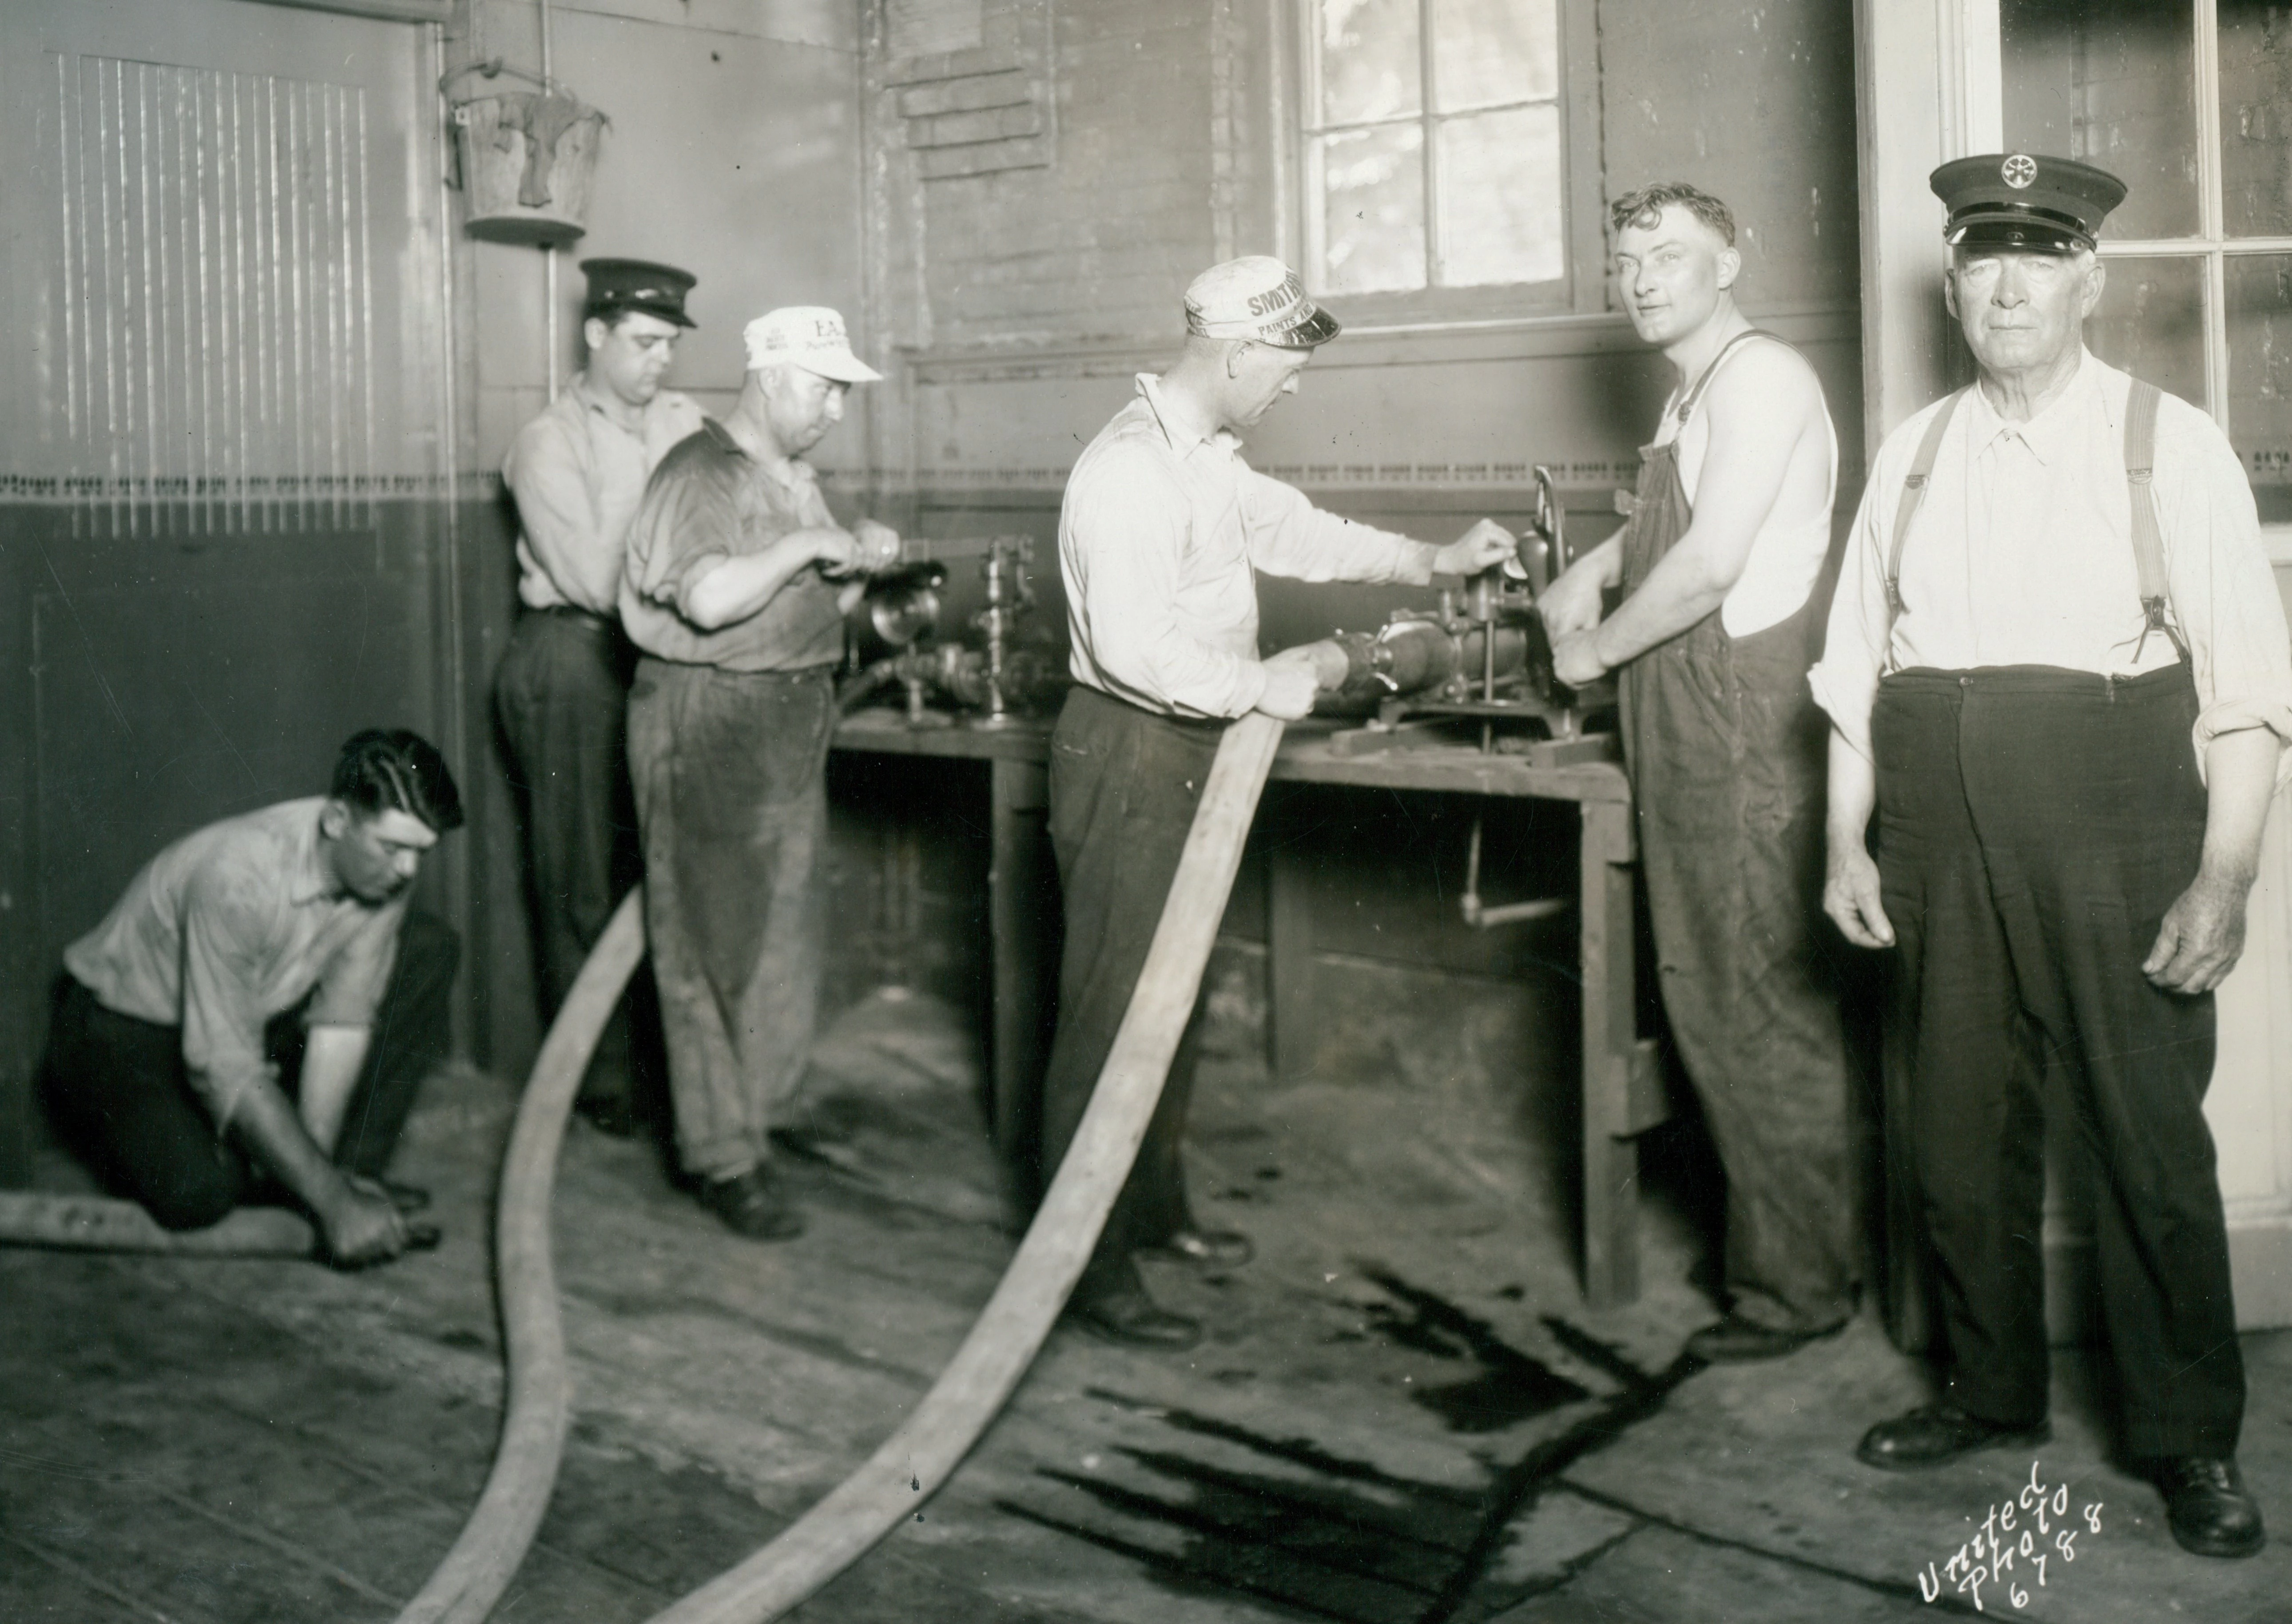 6 men are in this photograph, two standing at a contraption with hoses attached. The floor is wet.